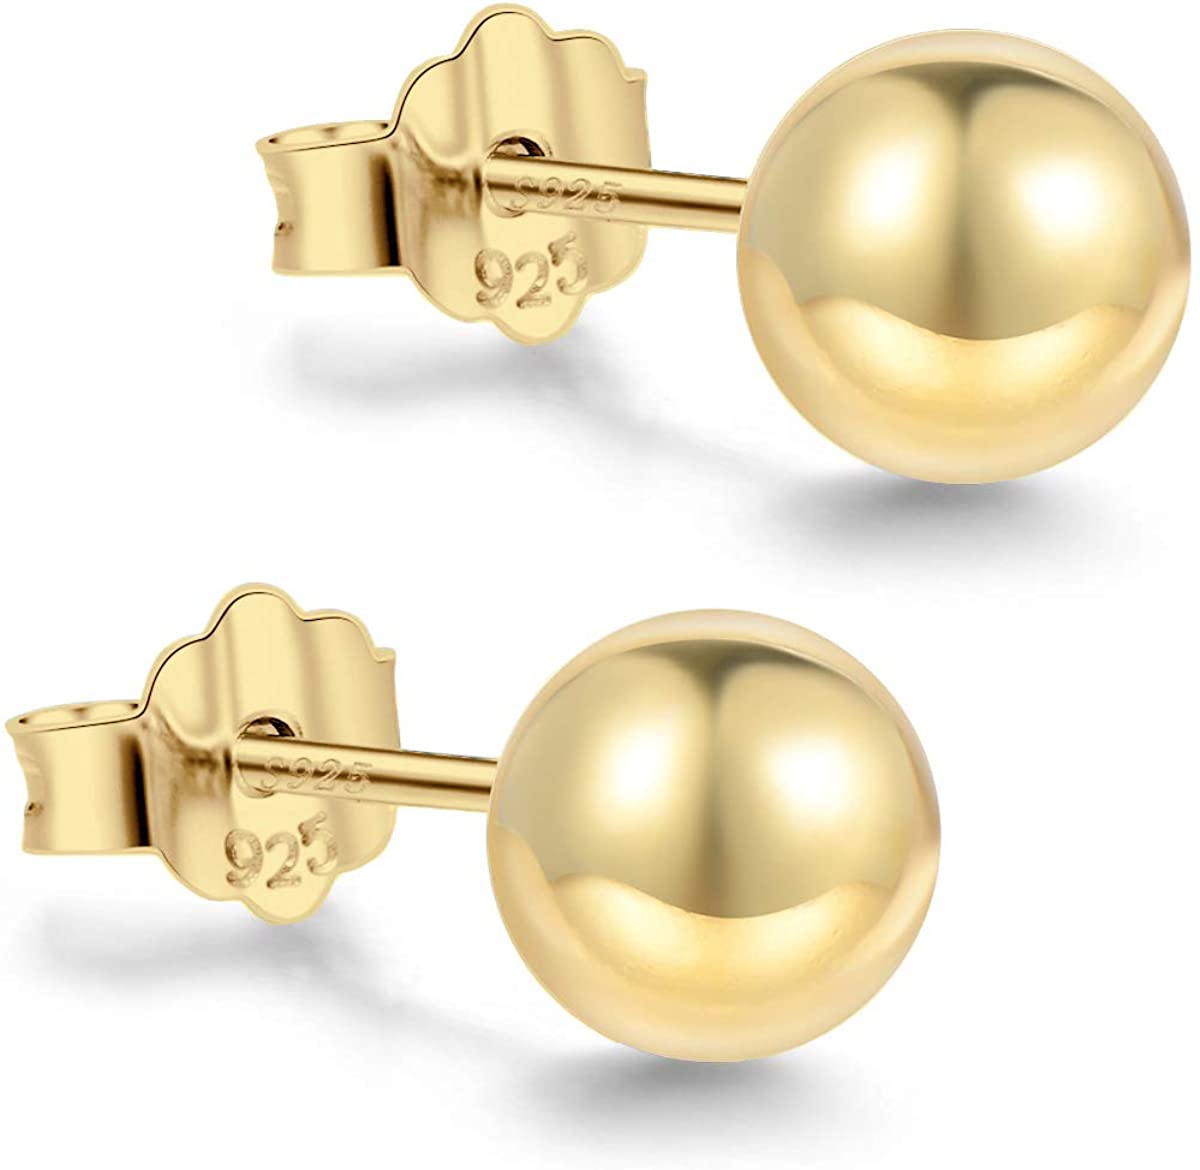 18K Gold Plated Sterling Silver Ball Stud Earrings 3mm-10mm Options, Simple Polished Ball Studs Hypoallergenic Jewelry